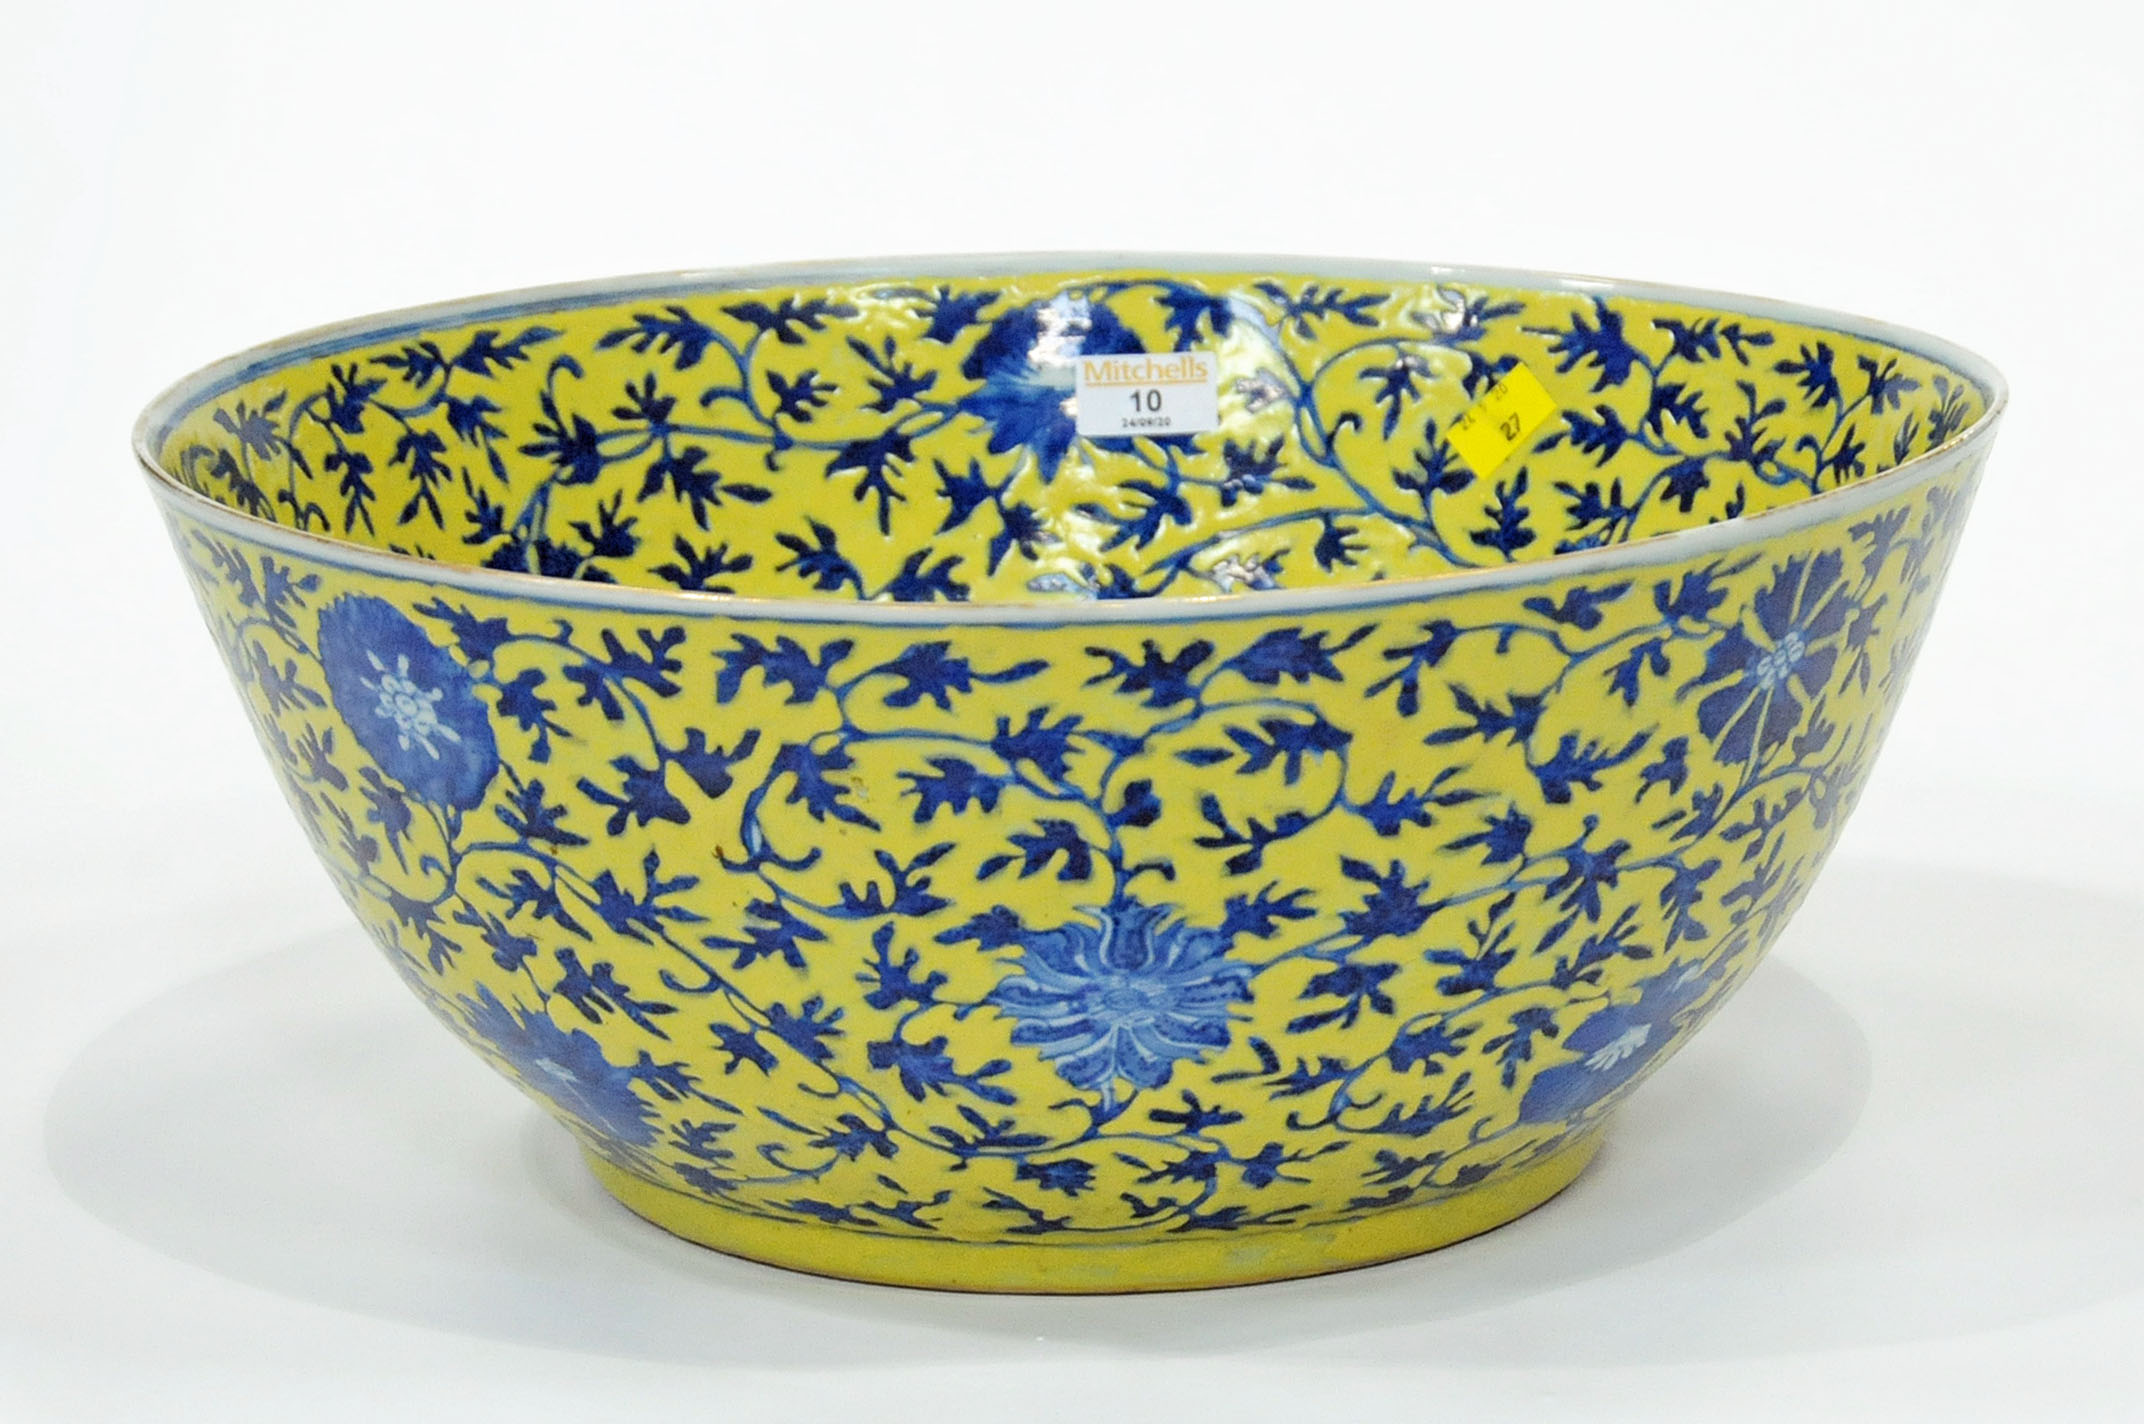 Large blue floral bowl on yellow background,